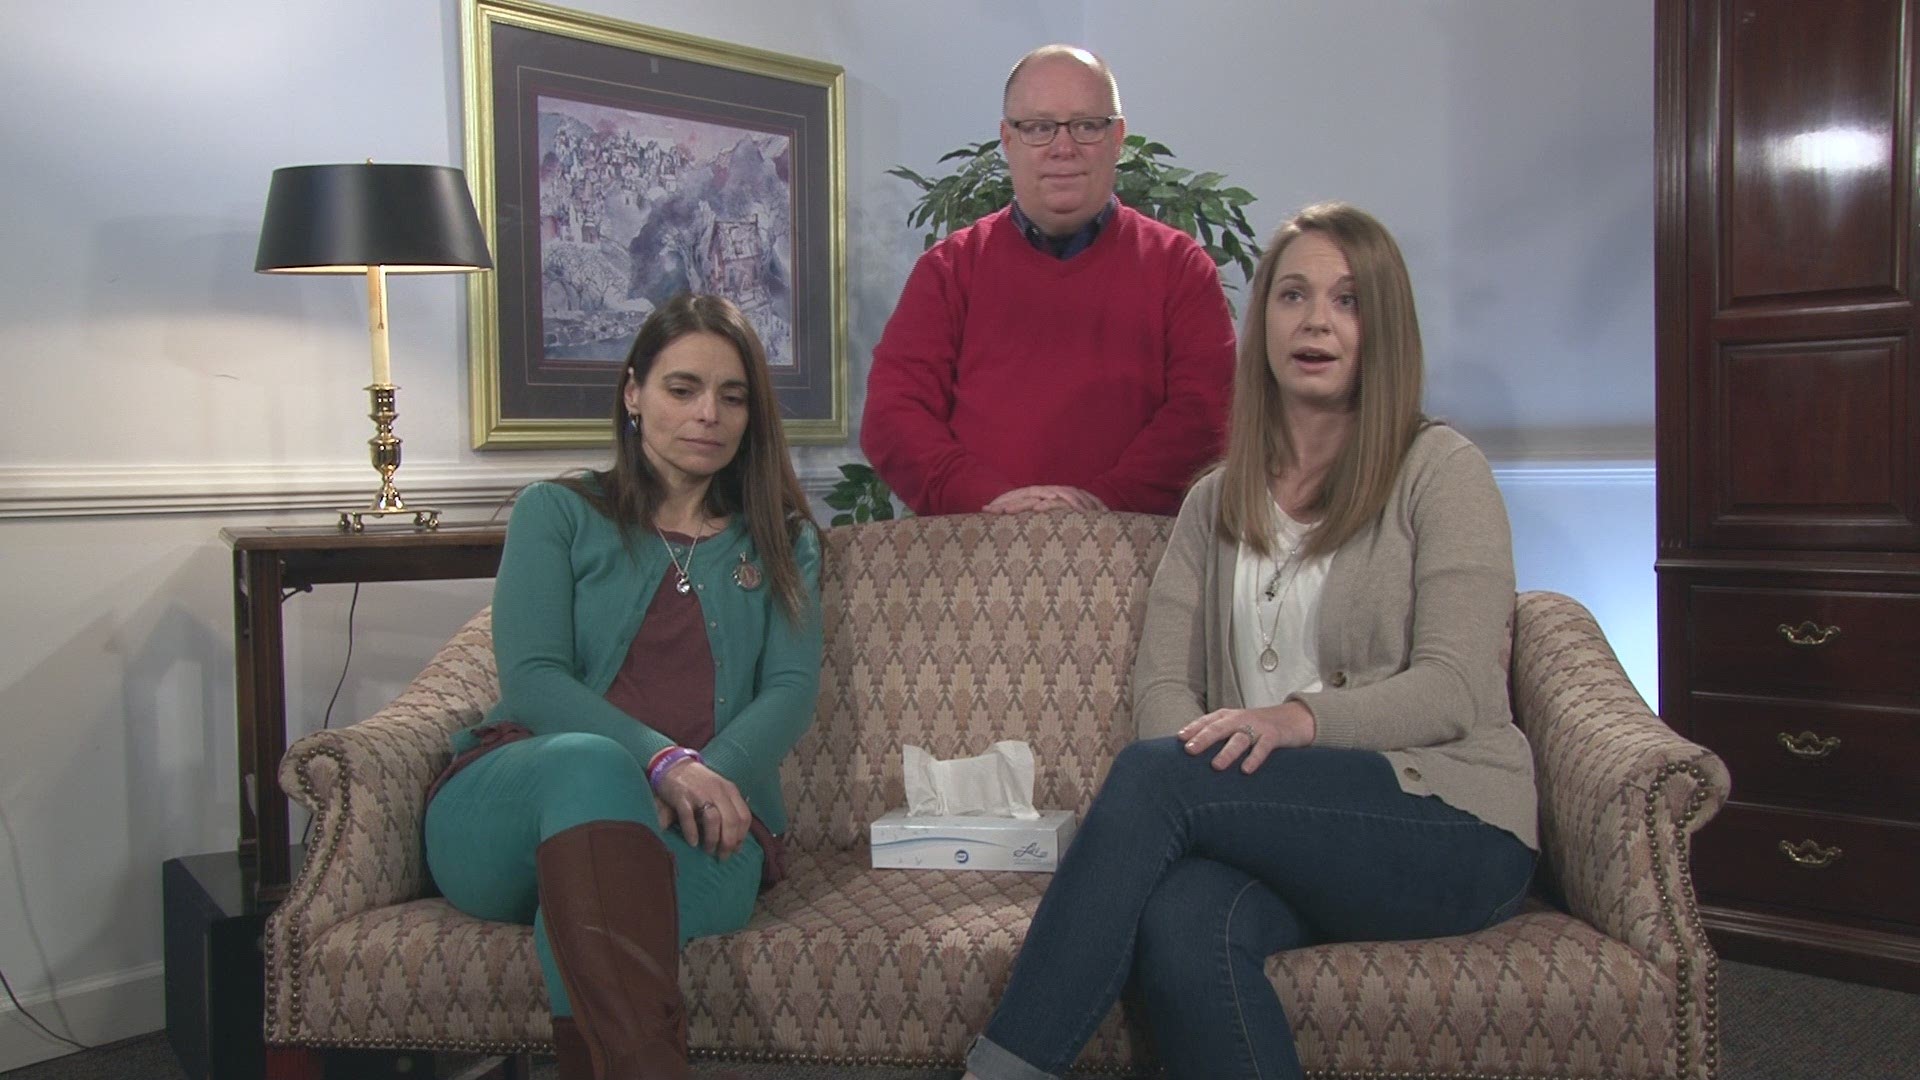 WFMY News 2's Erica Stapleton talked to families who lost loved ones from overdose. They talk candidly about watching their struggles with drug addiction.